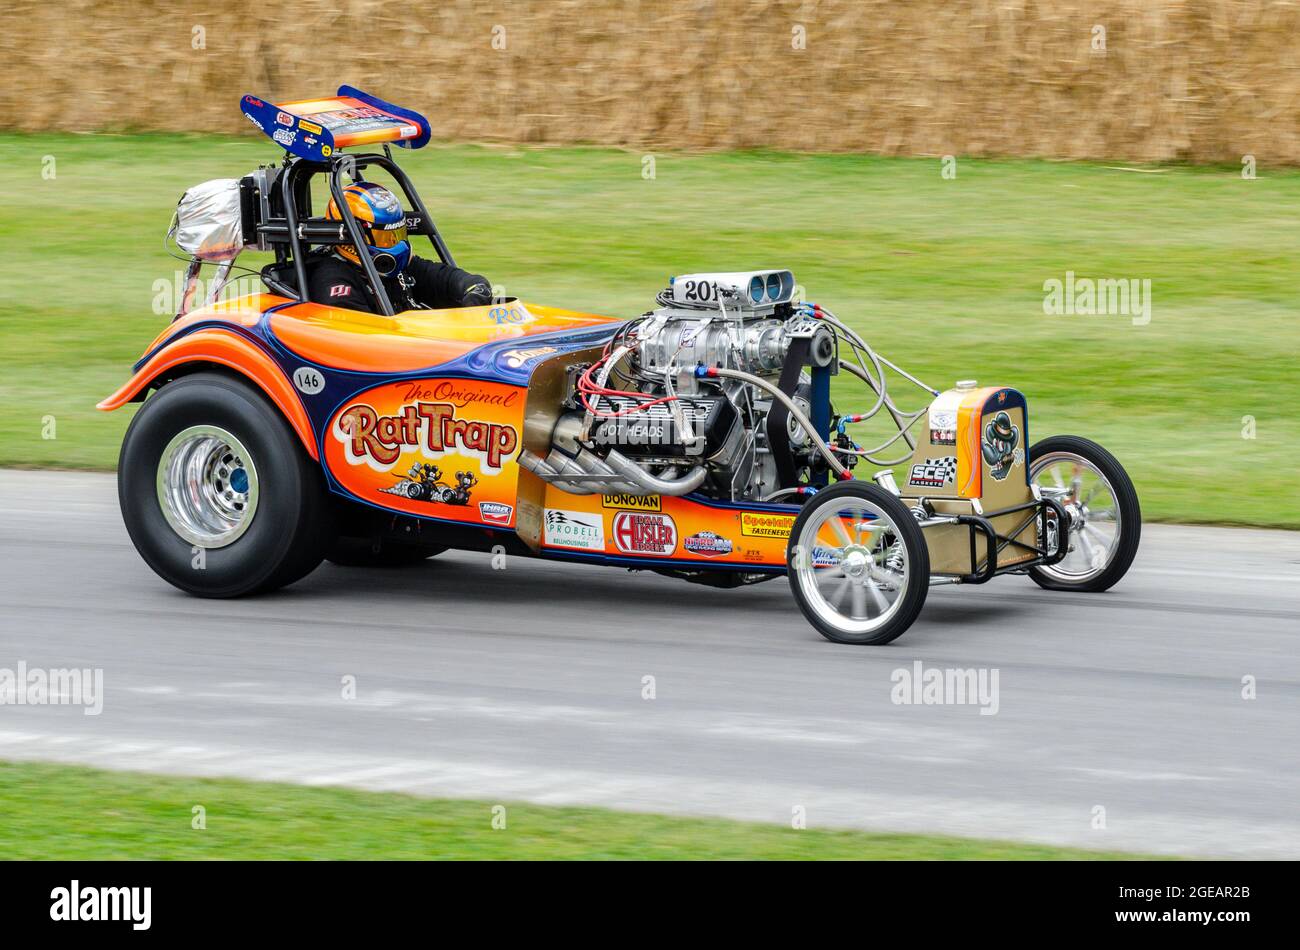 Fuel Altered Dragster at the Goodwood Festival of Speed motor racing event 2014. The original Rat Trap, 1960s drag racer Stock Photo